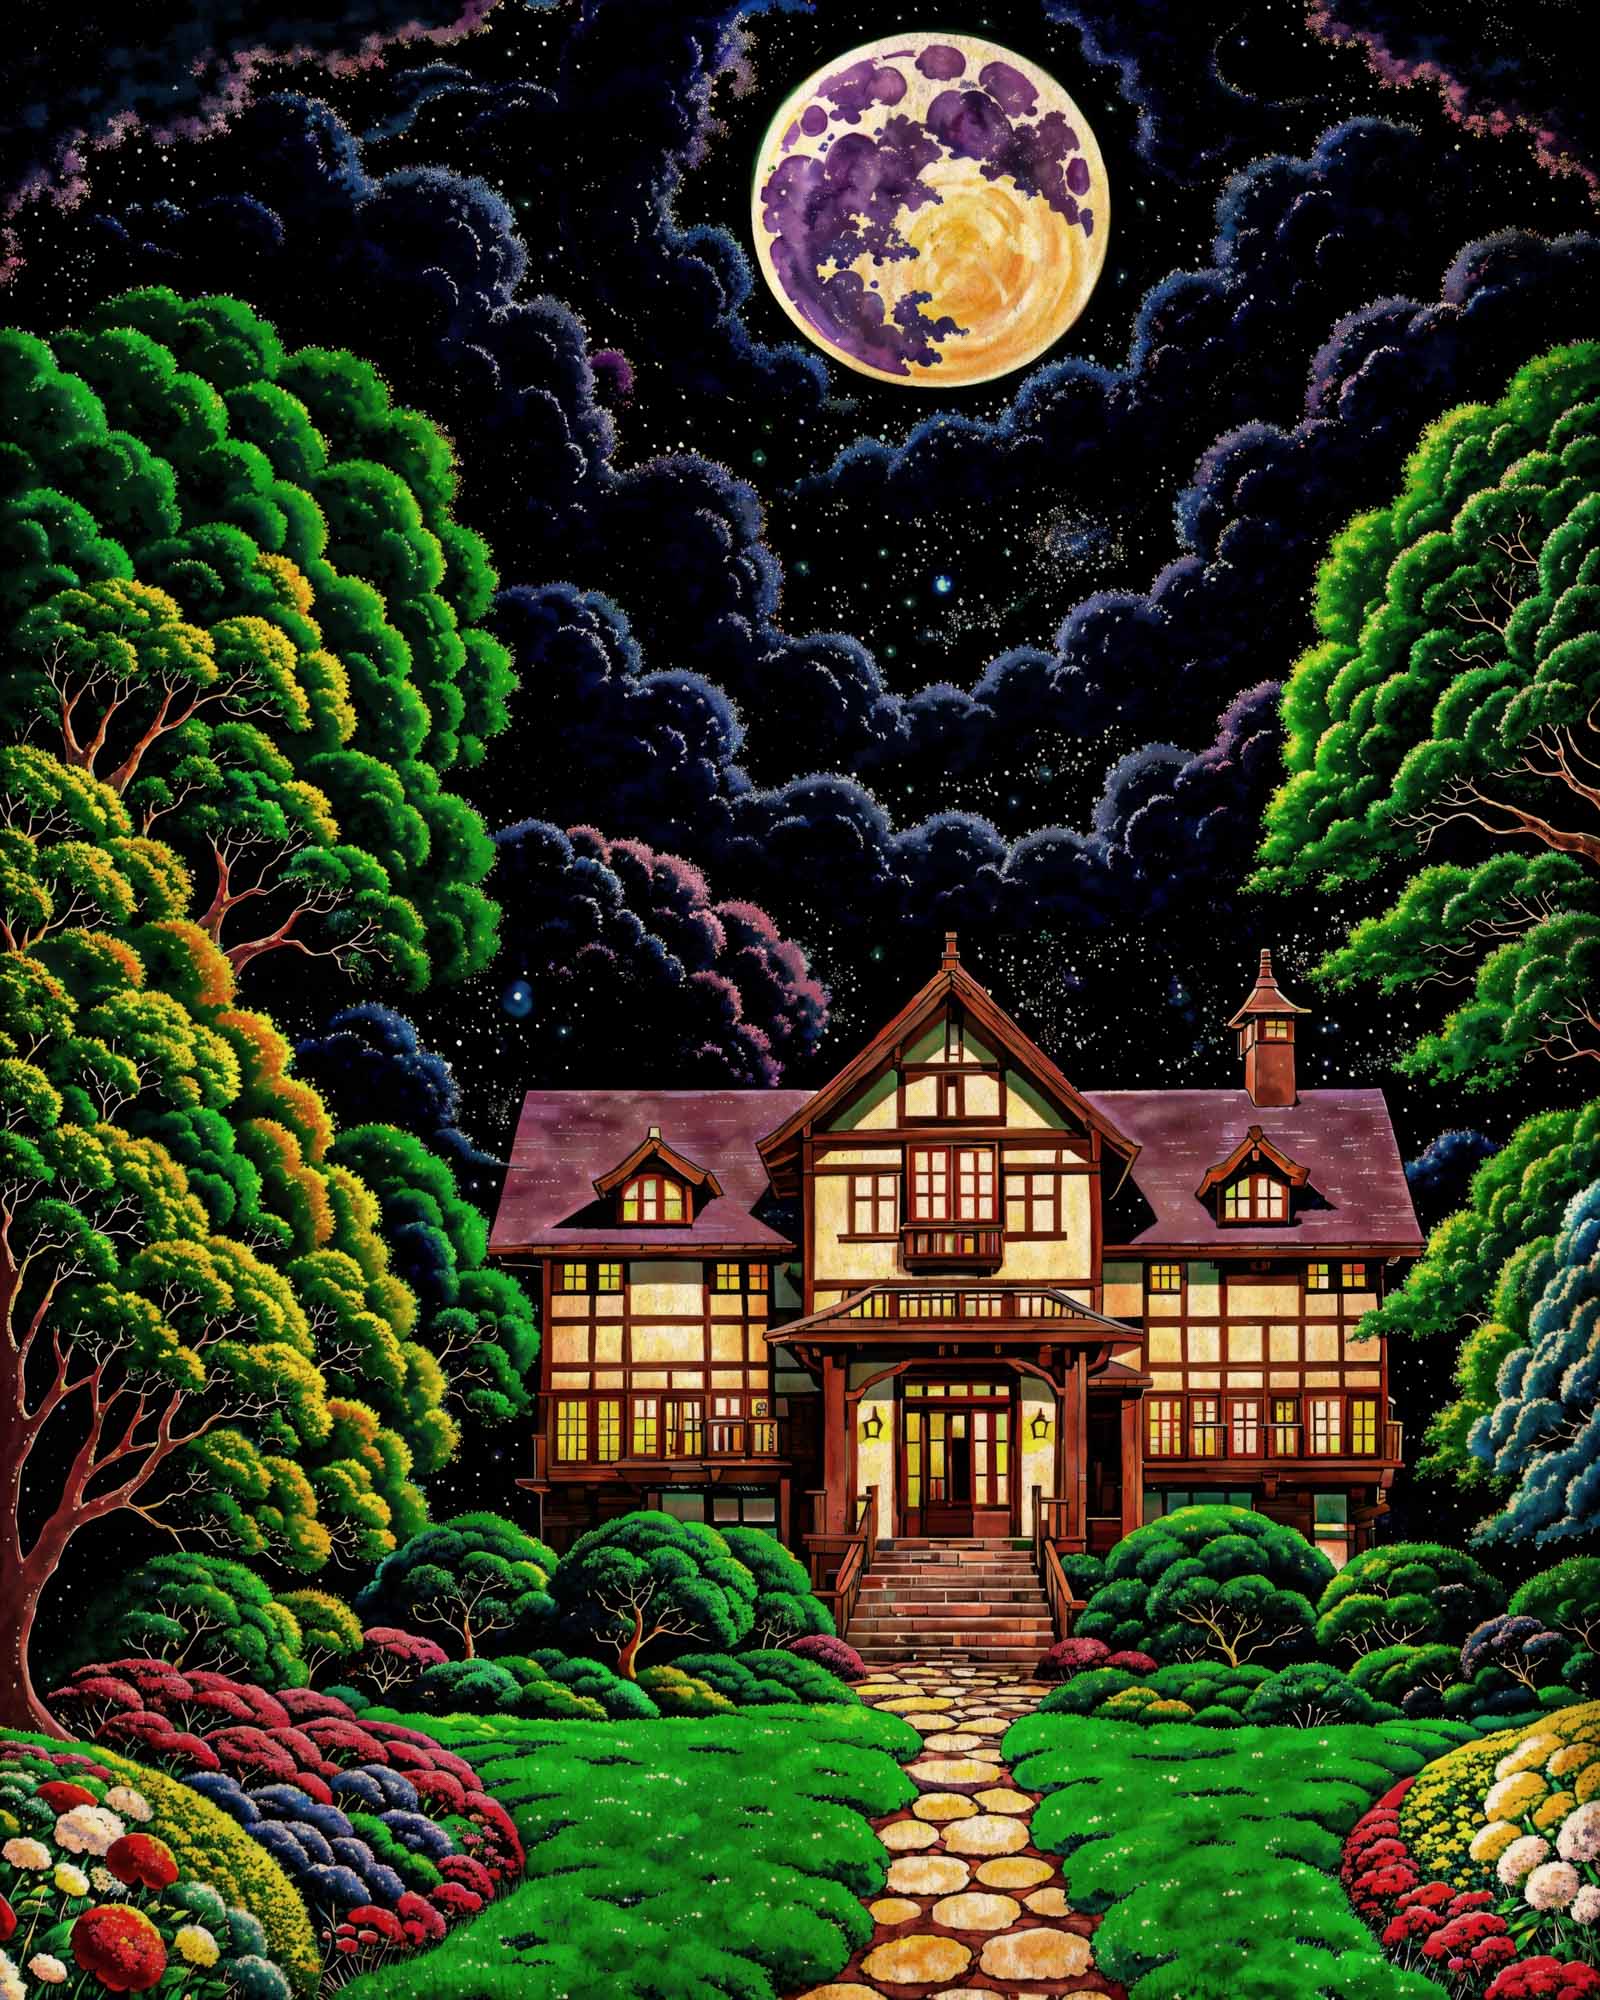 Moonlight mansion - Poster - Ever colorful